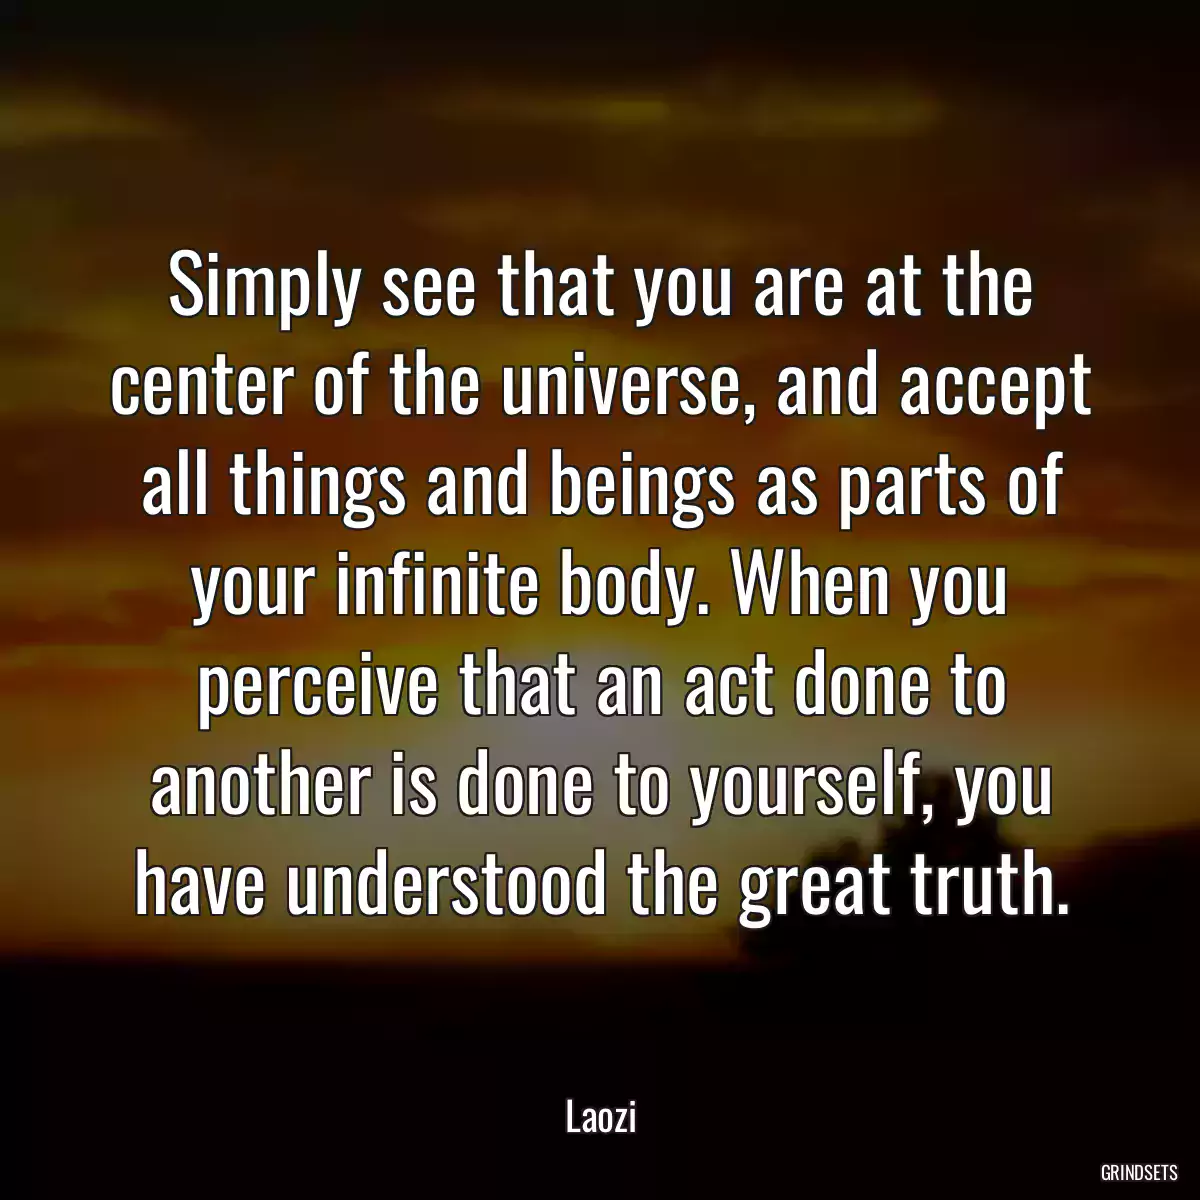 Simply see that you are at the center of the universe, and accept all things and beings as parts of your infinite body. When you perceive that an act done to another is done to yourself, you have understood the great truth.